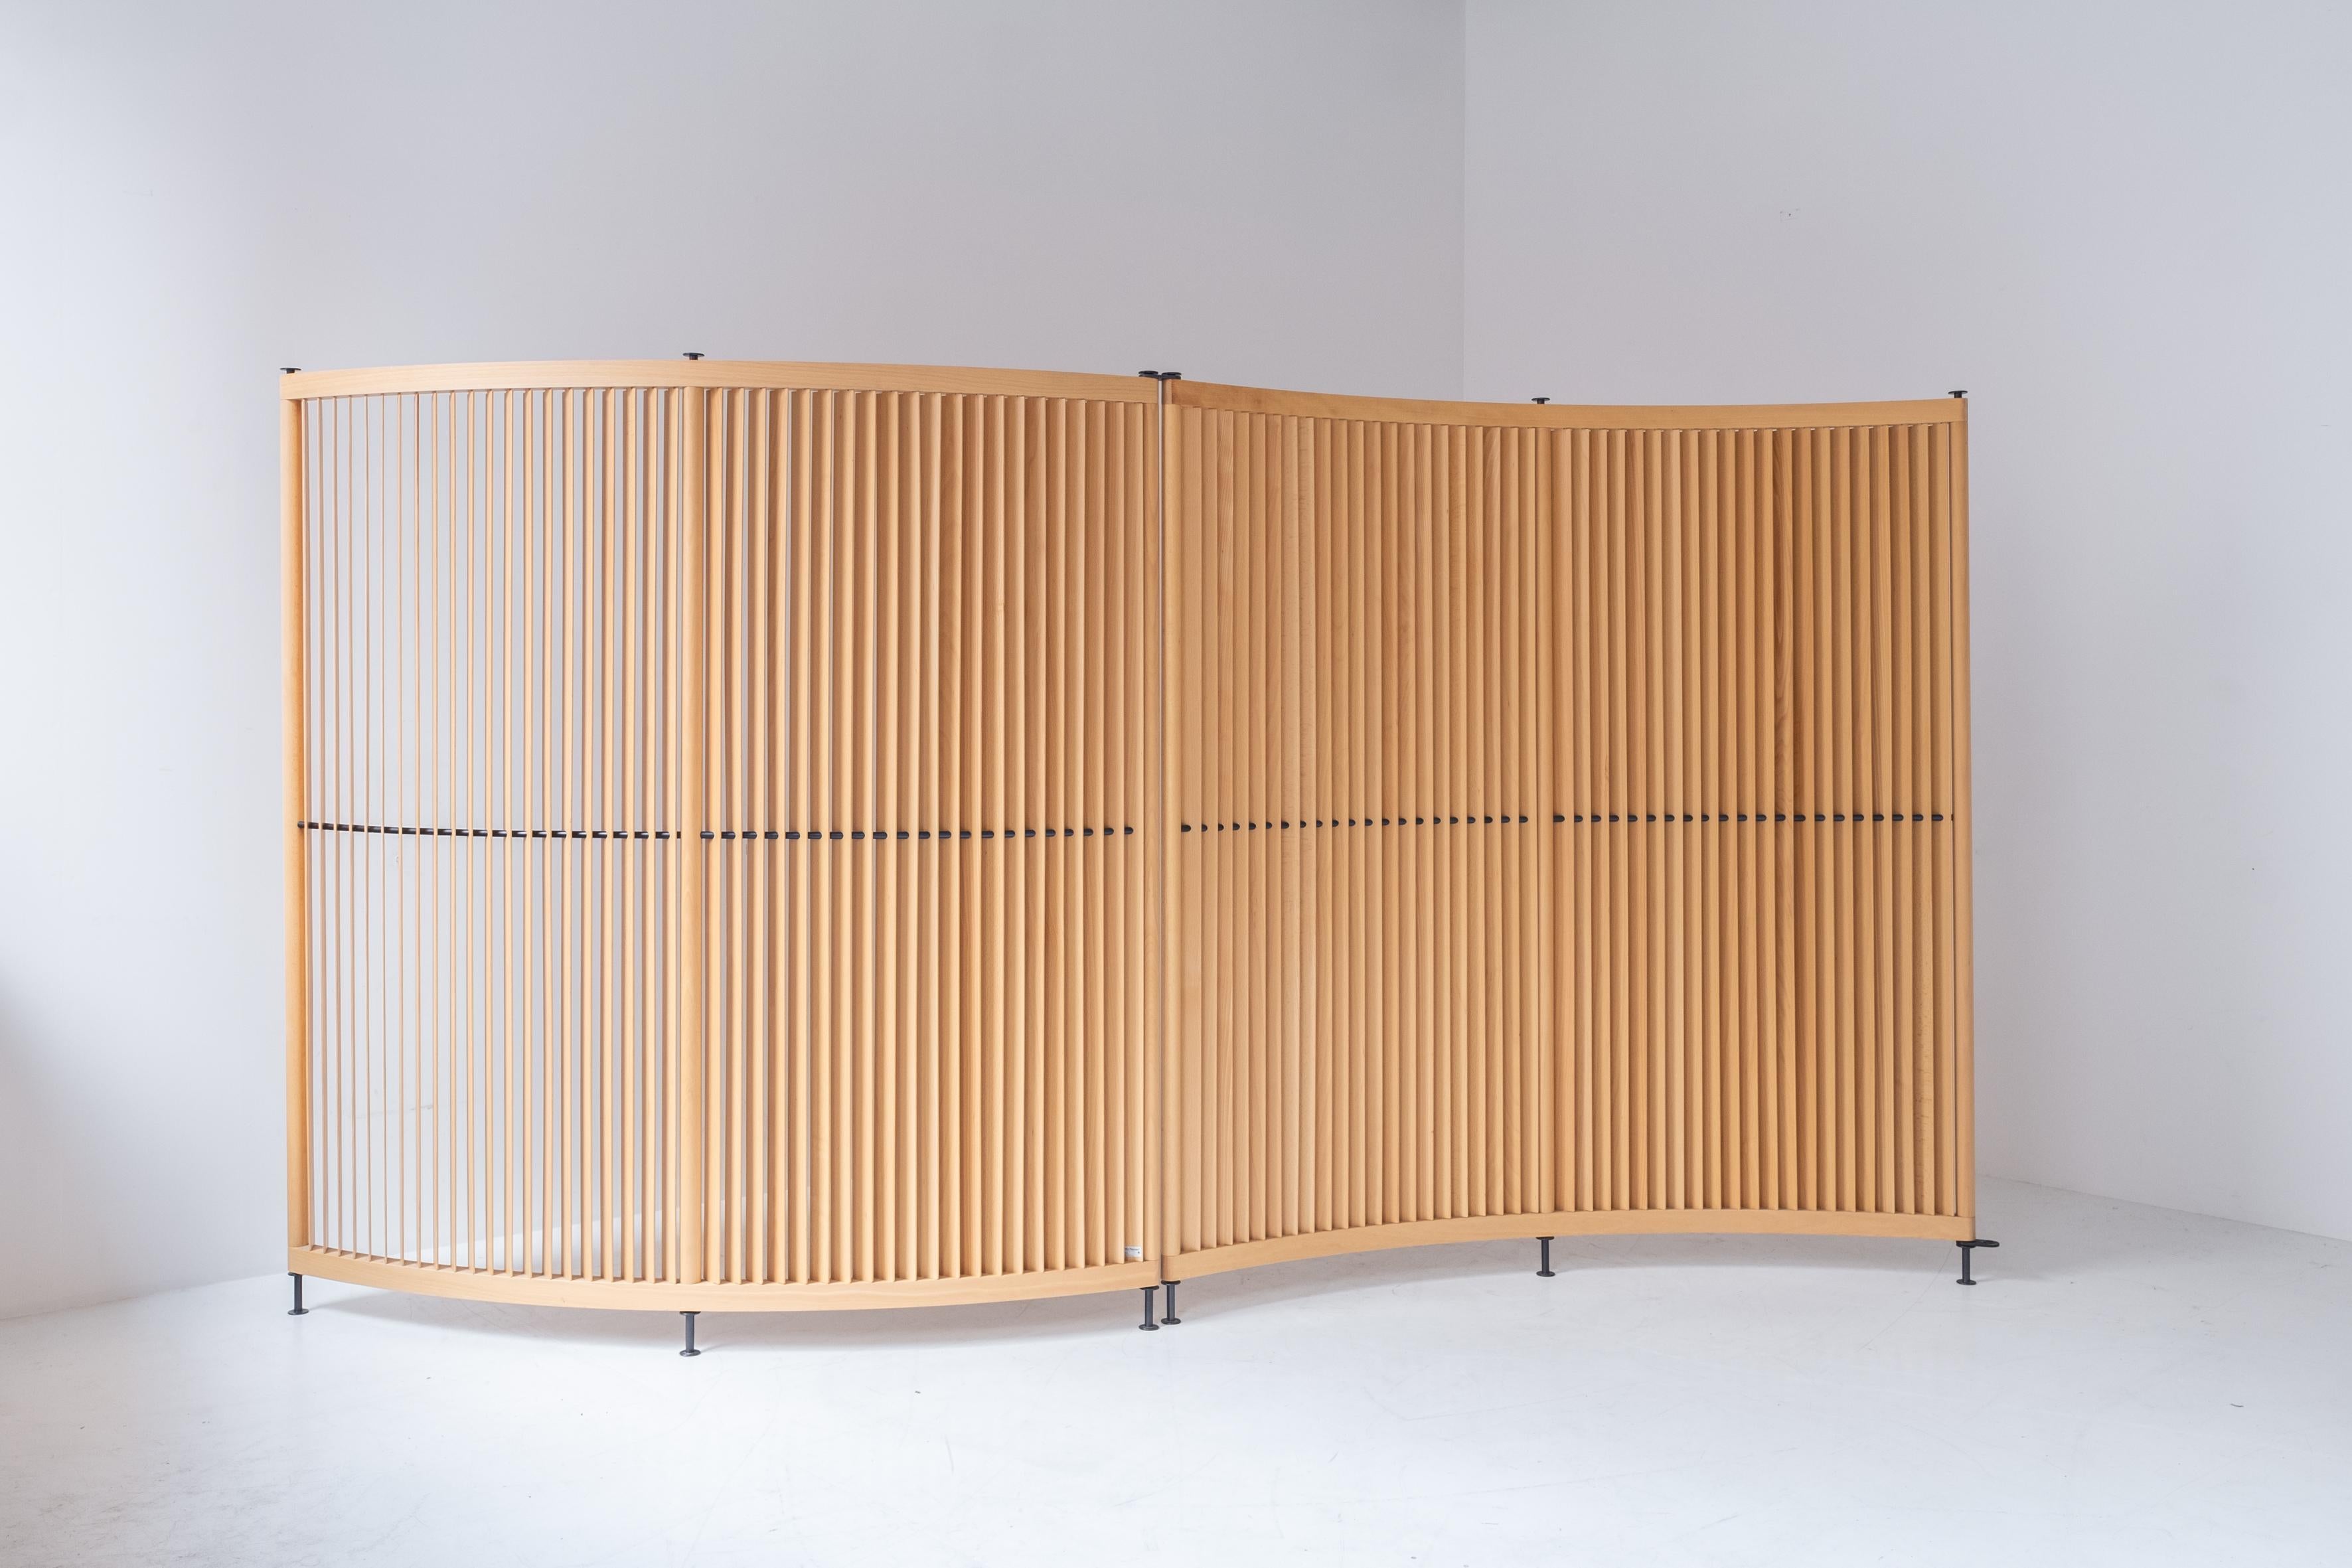 Set of 2 identical room dividers model ‘Labyrinth’ designed by Niels Gammelgaard and Lars Mathiesen under their brand name ‘Pelikan Design’ for Fritz Hansen, Denmark 1990’s. These room dividers features solid beech slats and black metal legs. Both